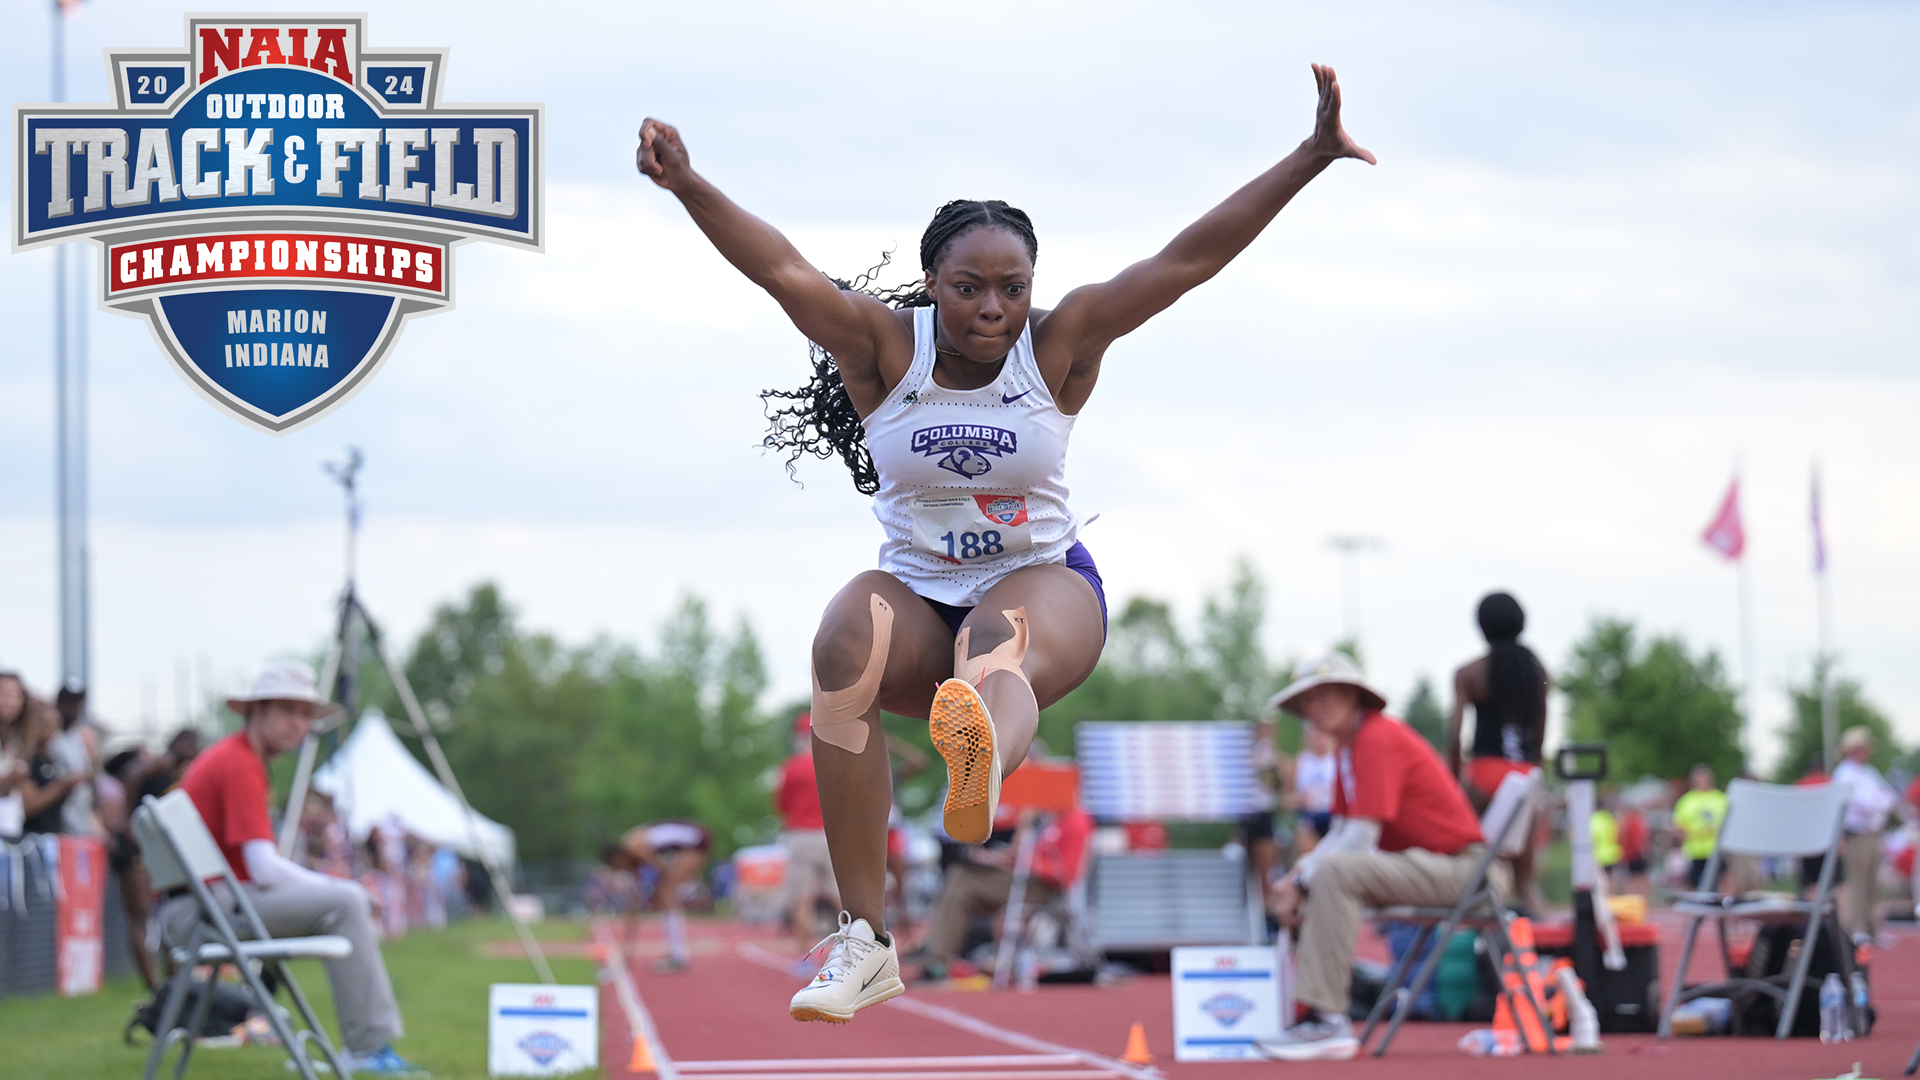 AAC Collects 8 All-Americans at NAIA Women's Track Championships